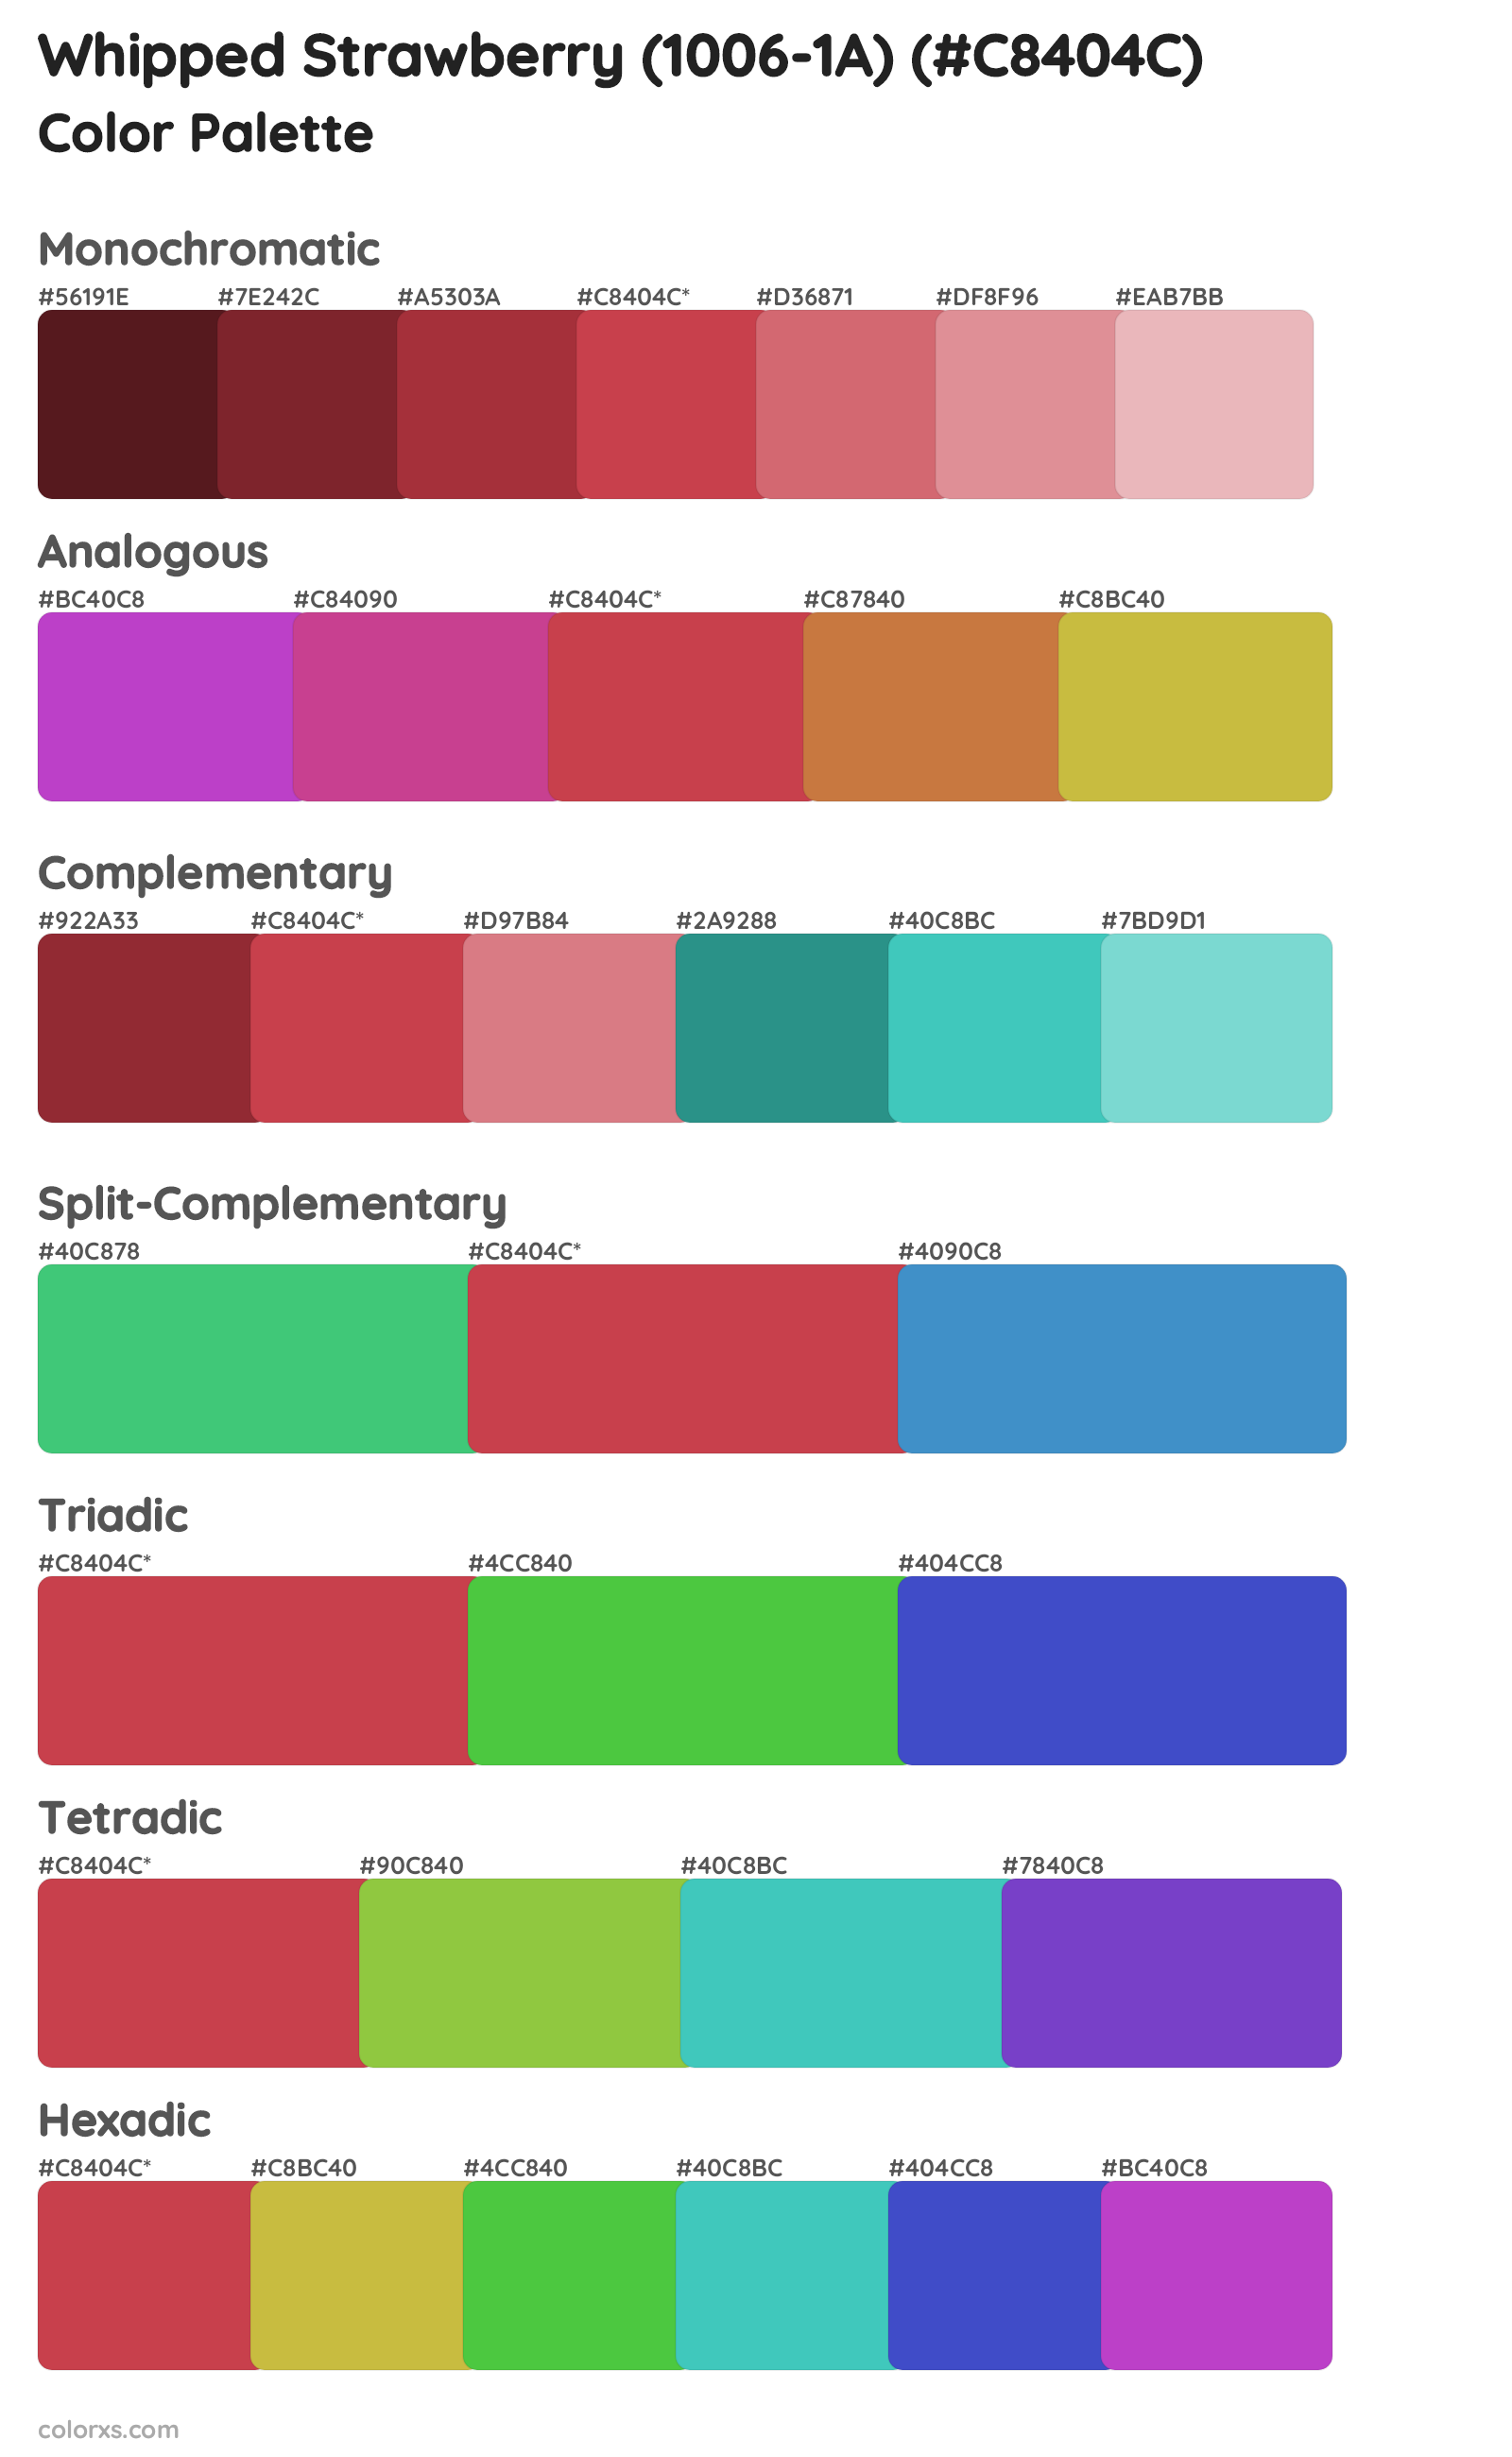 Whipped Strawberry (1006-1A) Color Scheme Palettes